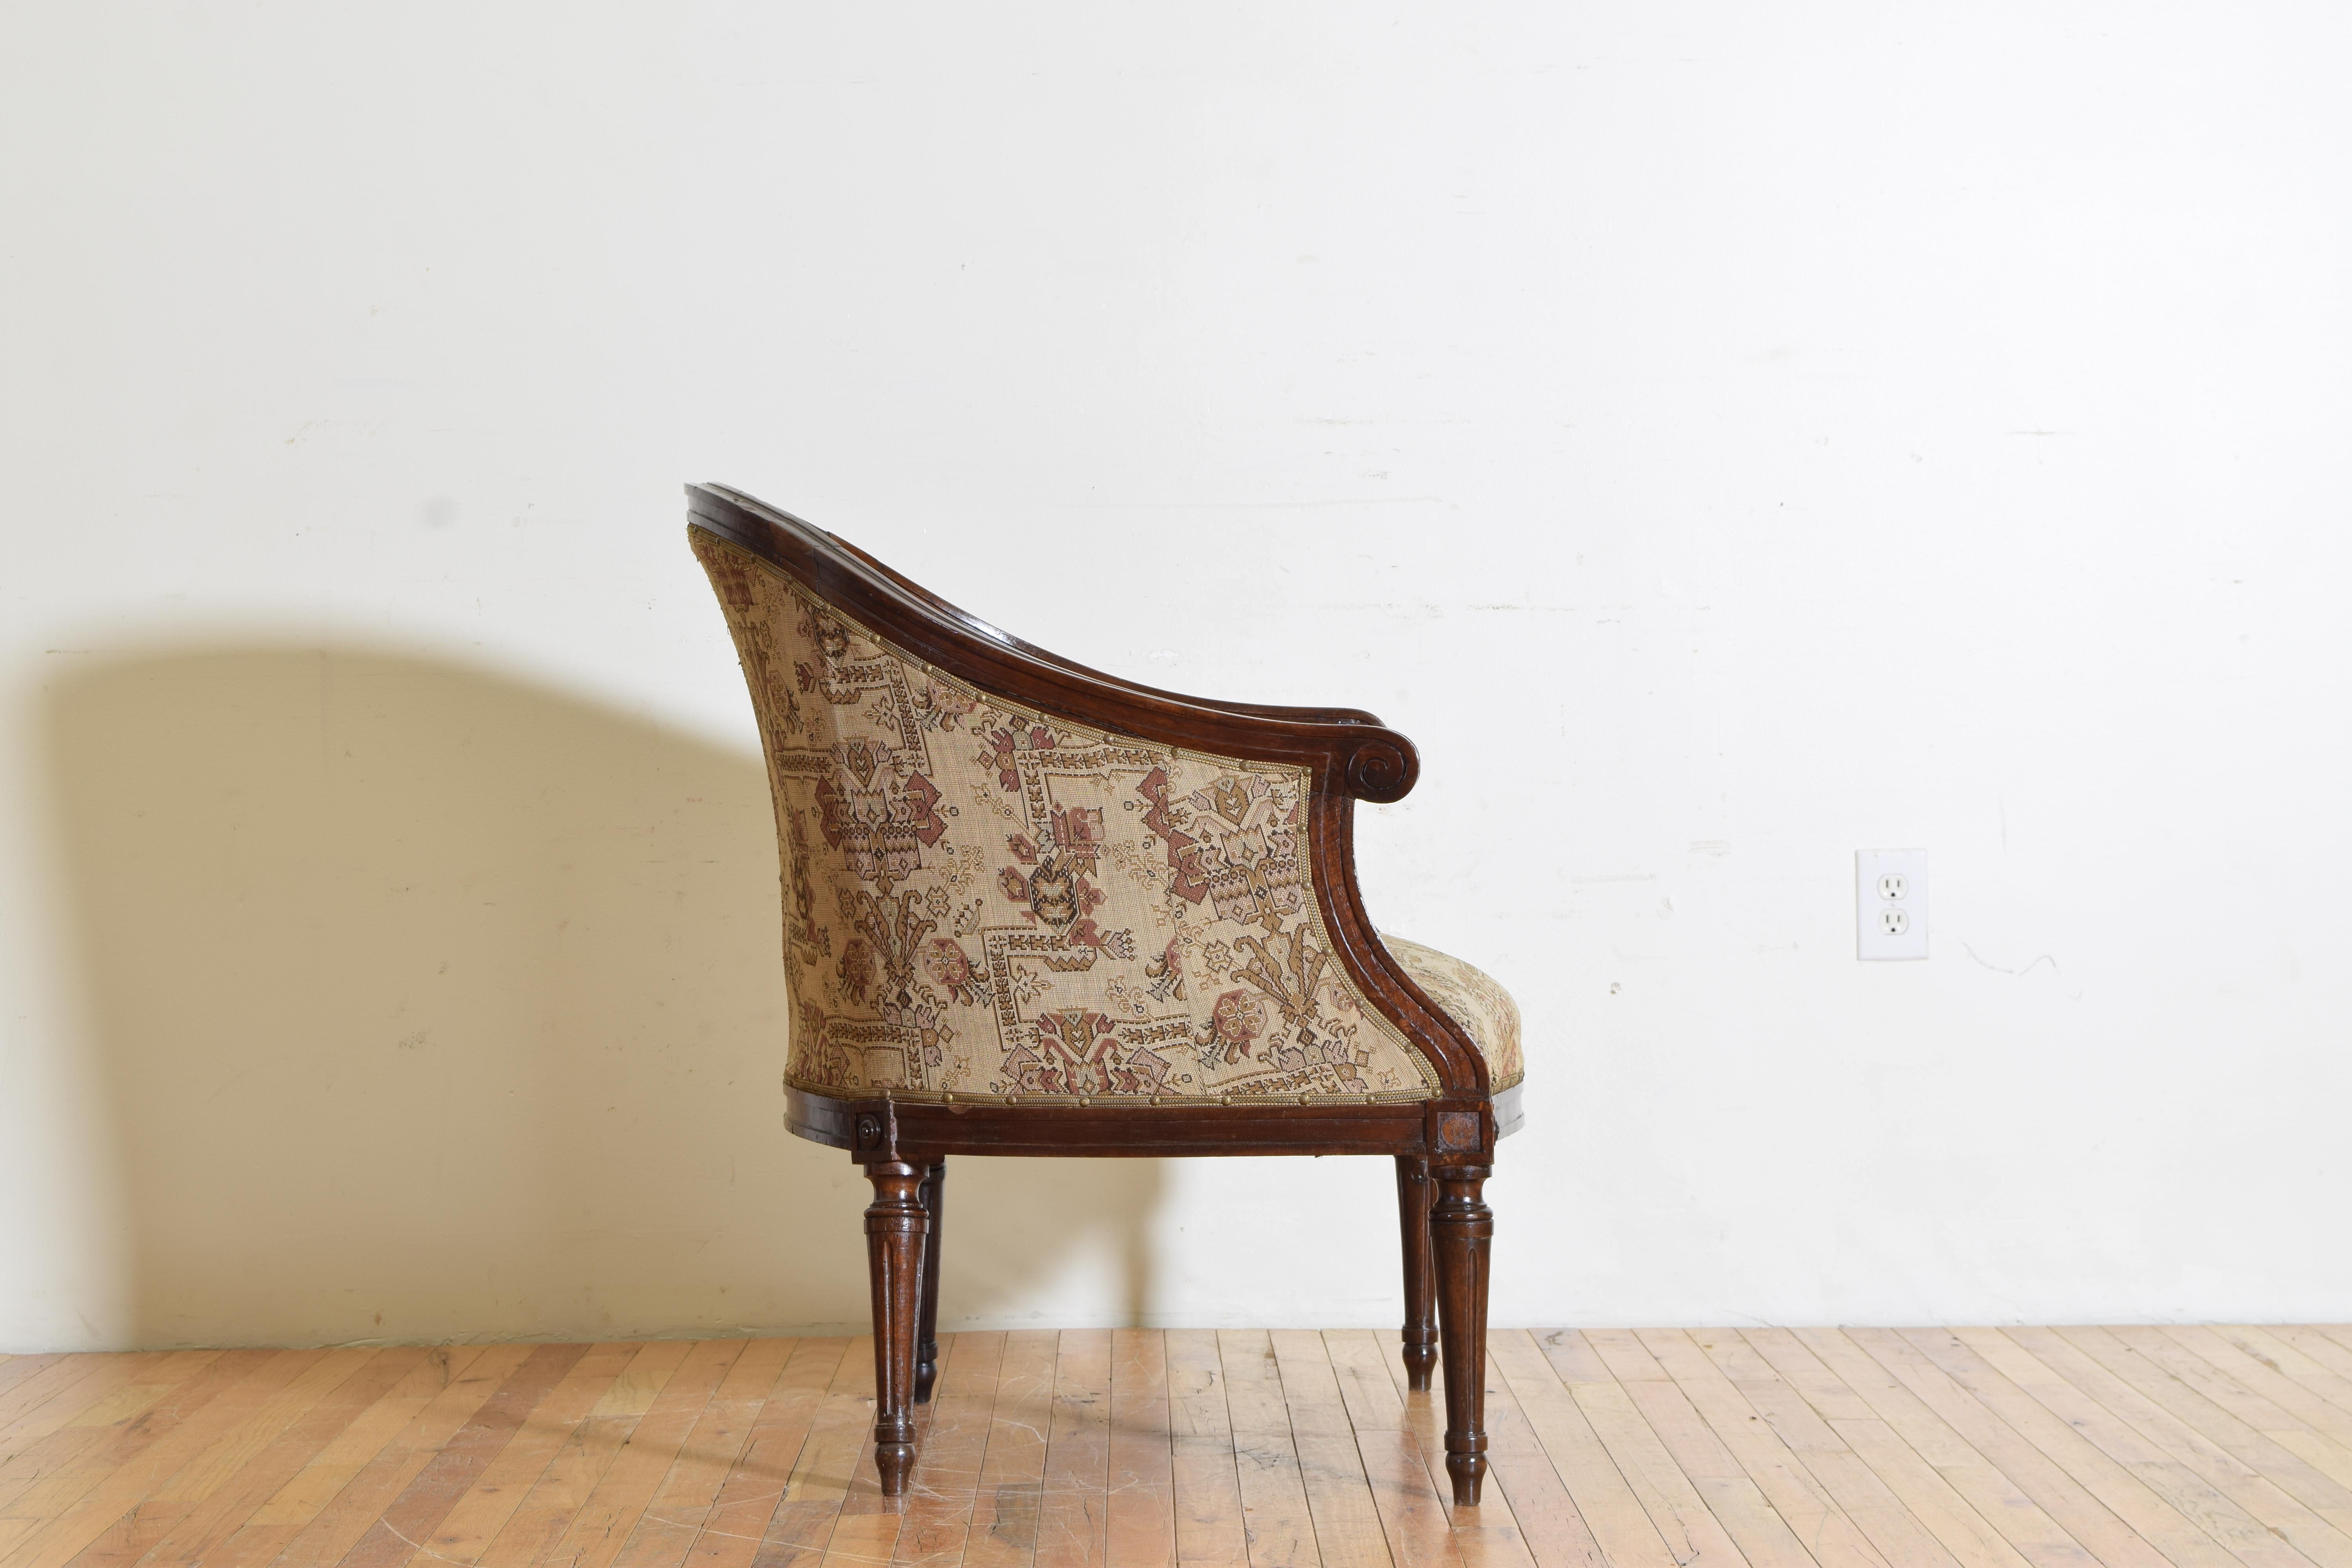 19th Century Italian Neoclassical Period Walnut & Upholstered Bergere, 2nd Quarter 19th Cen